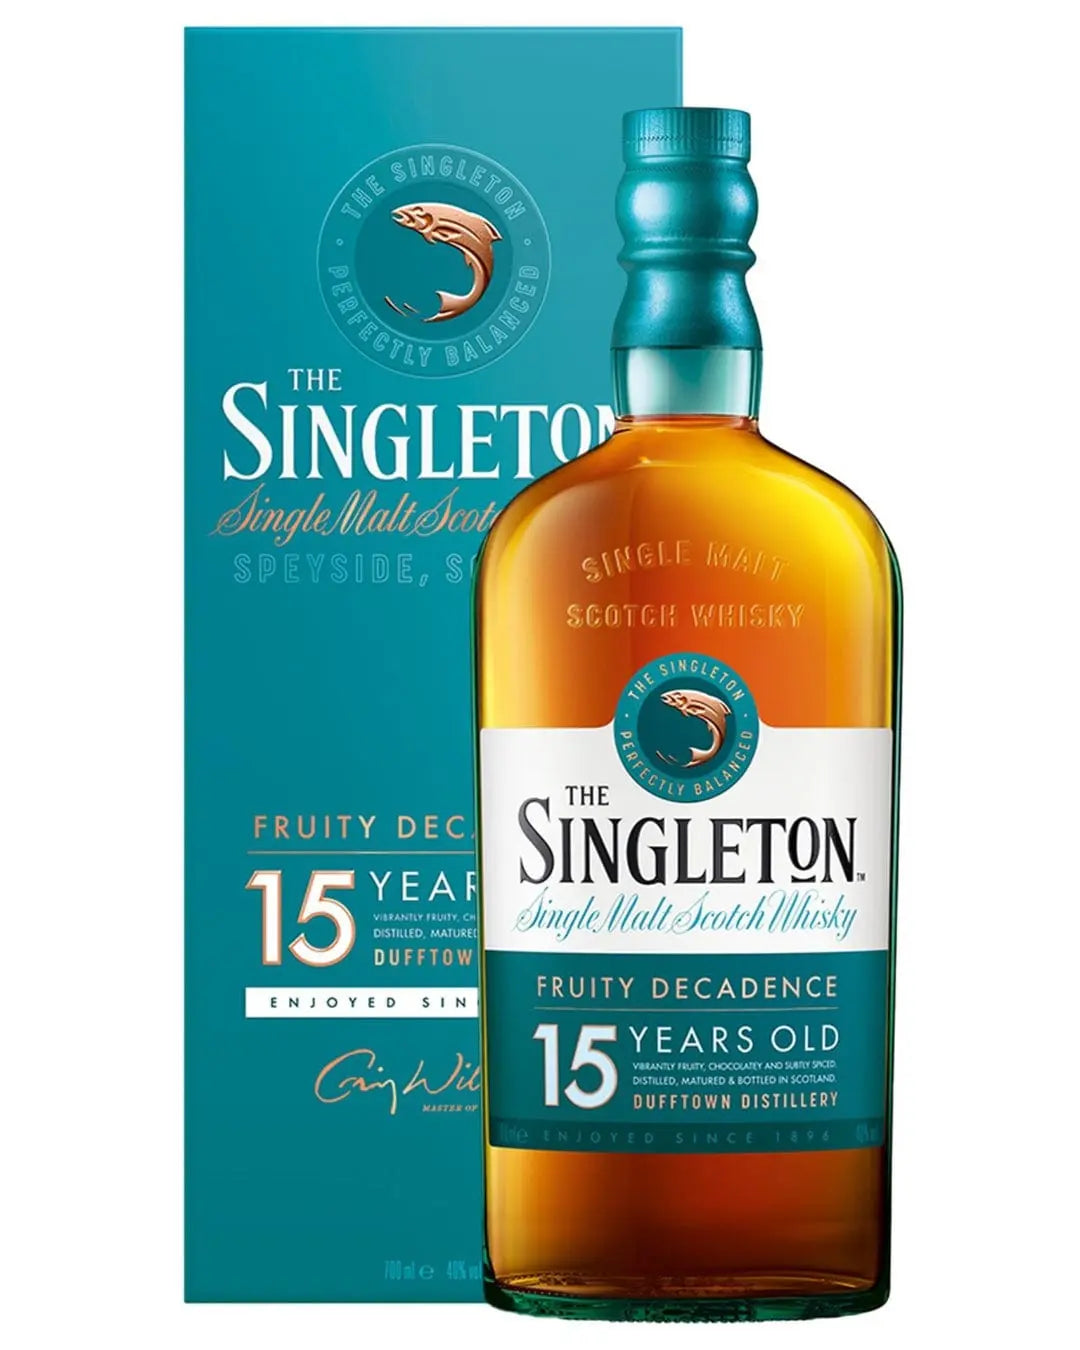 The Singleton of Dufftown 15 Year Old Single Malt Scotch Whisky, 70 cl Whisky